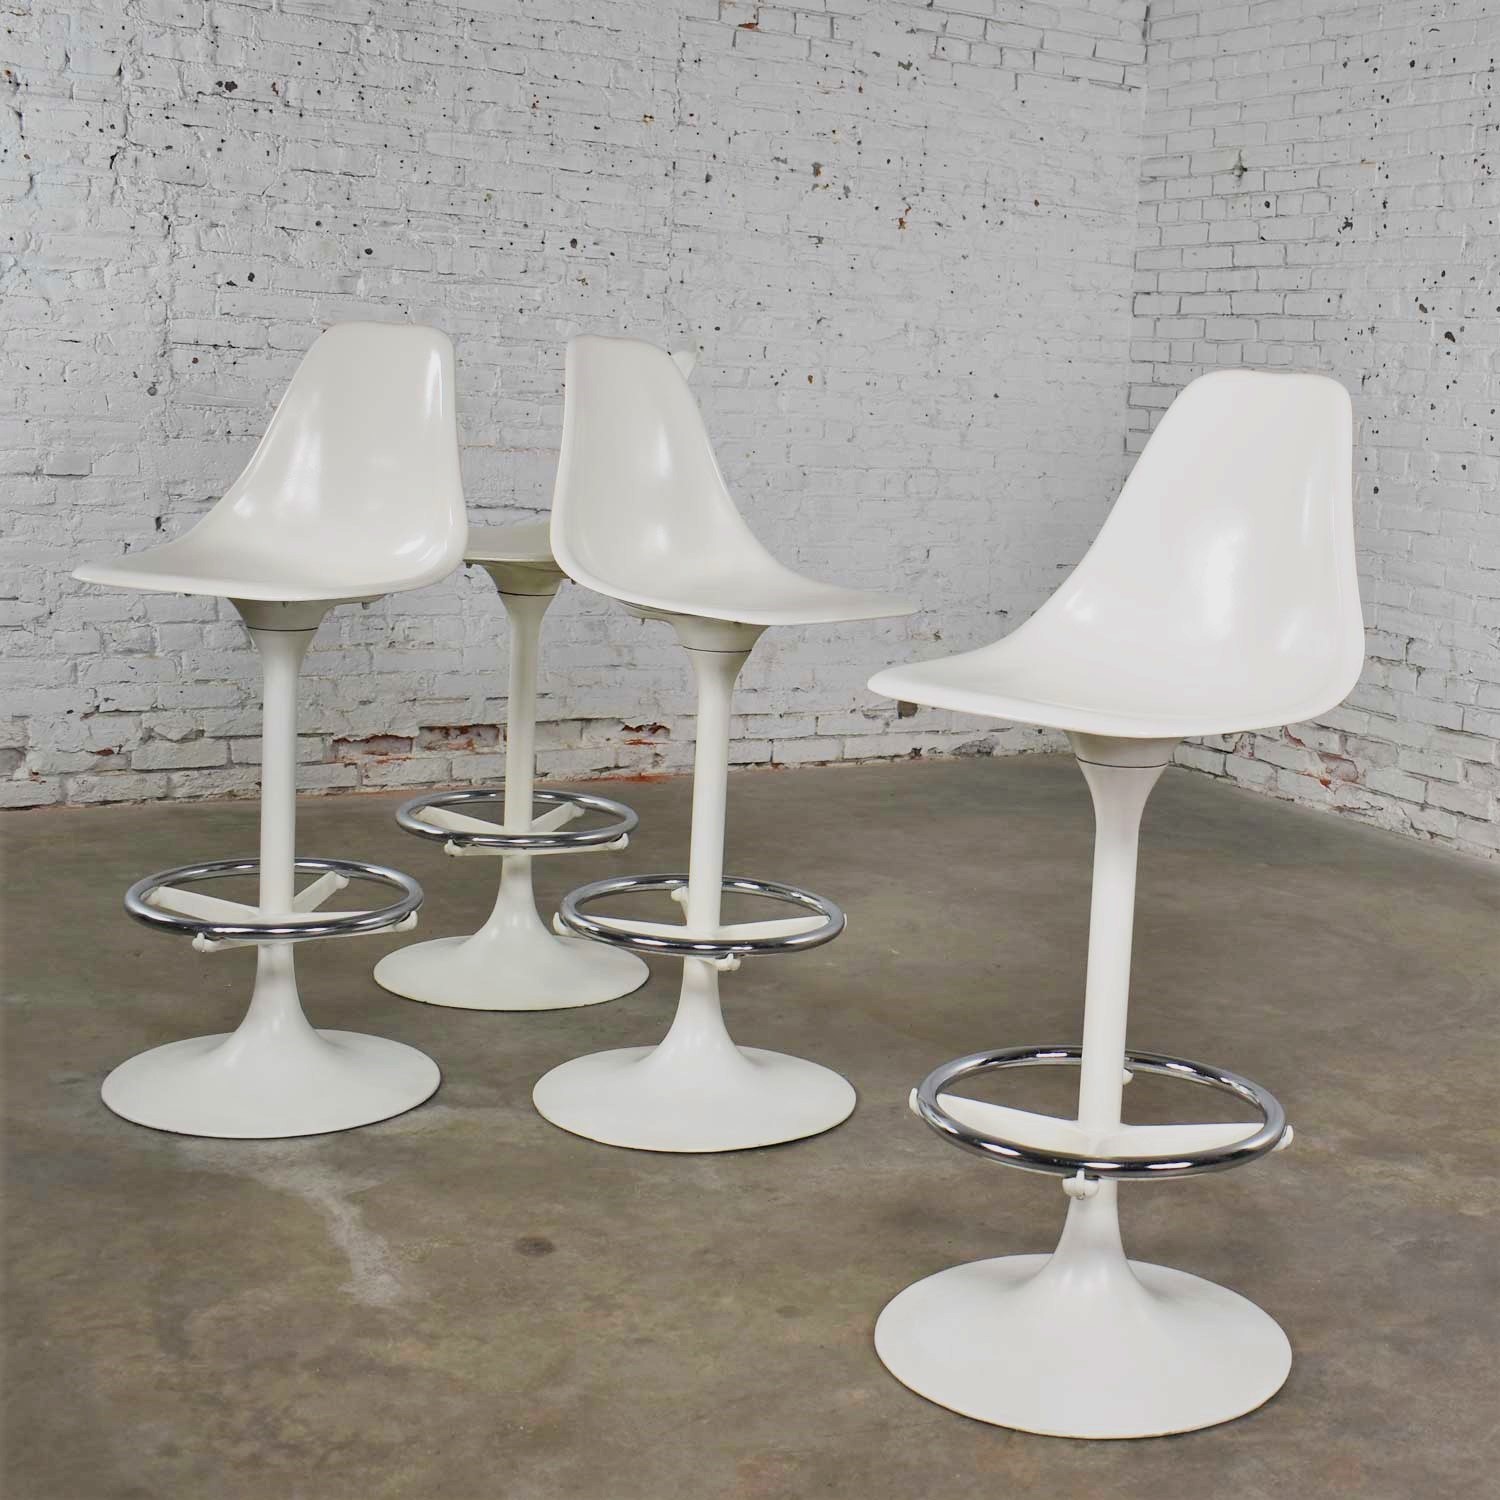 Set of Four Tulip Style White Swivel Barstools by Arthur Umanoff for Contemporary Shells